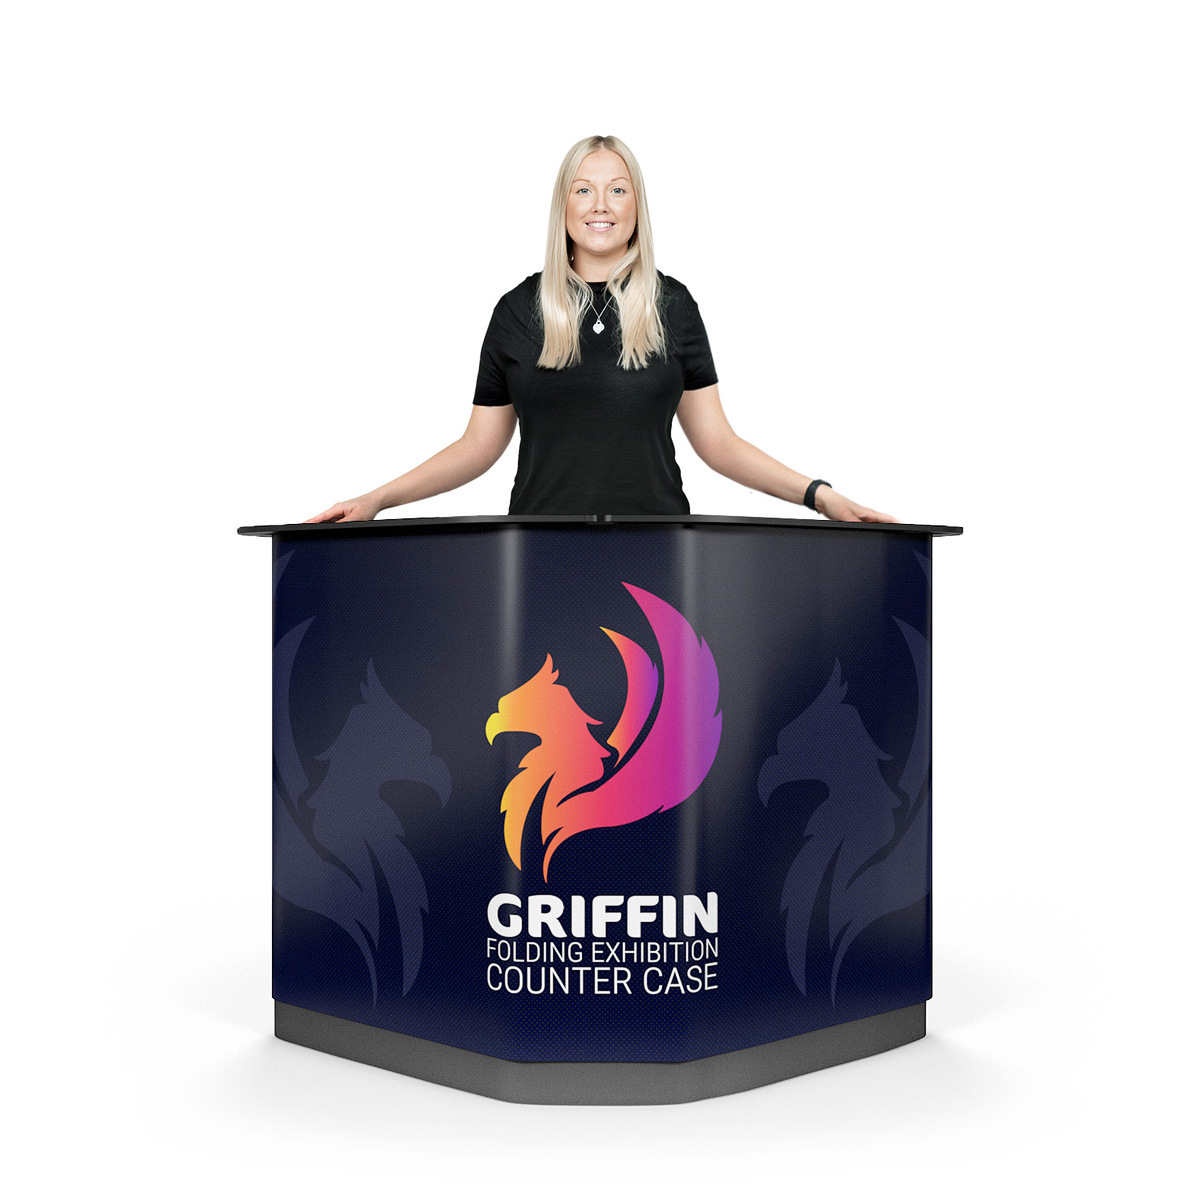 Griffin Promotional Exhibition Counter Case